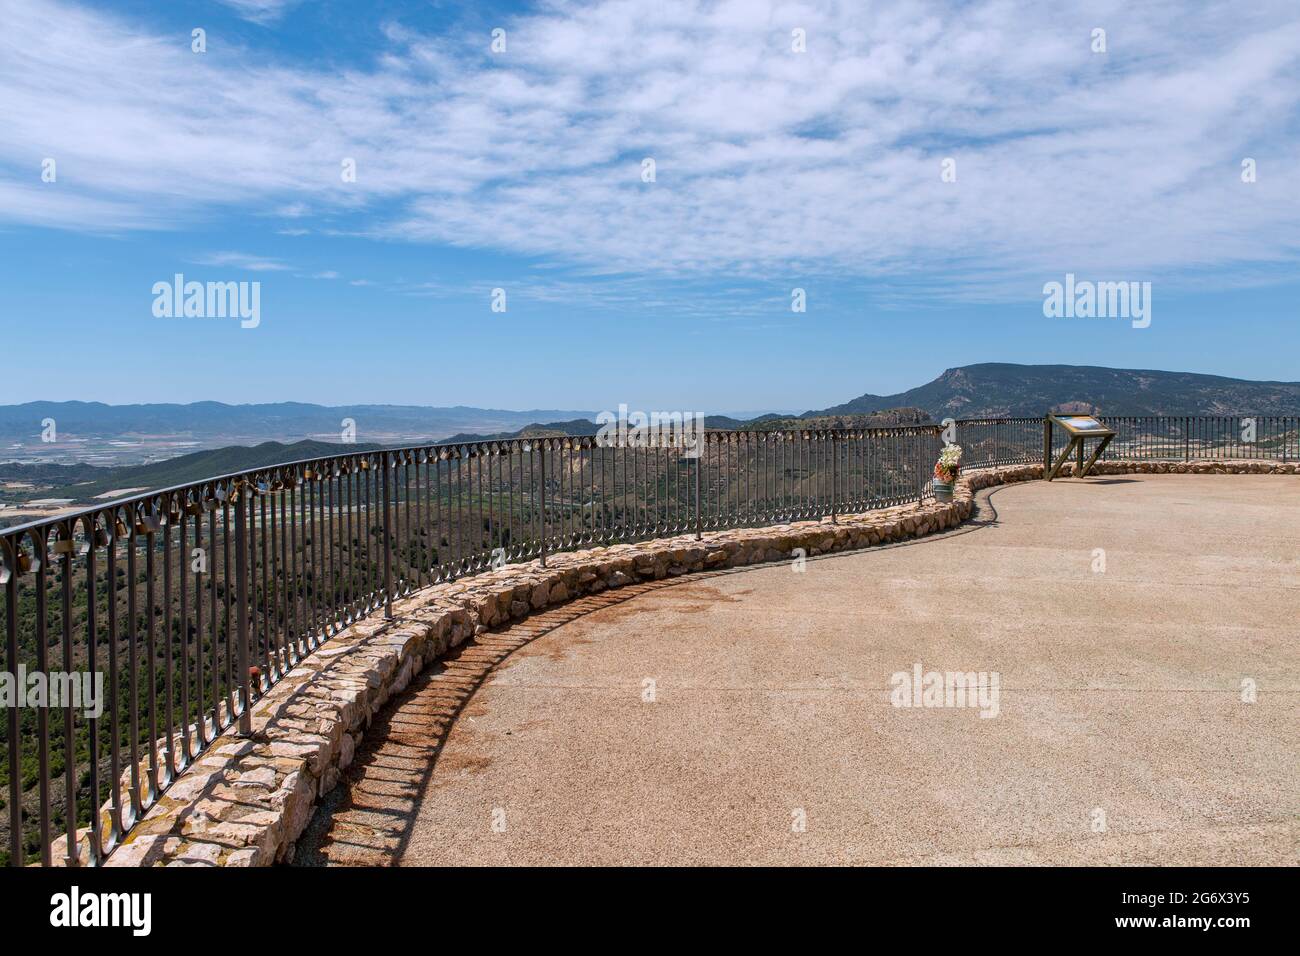 Mirador called the balcony in Totana, Murcia, Spain, large and espaectaculares views across the valley and villages in the area. Stock Photo